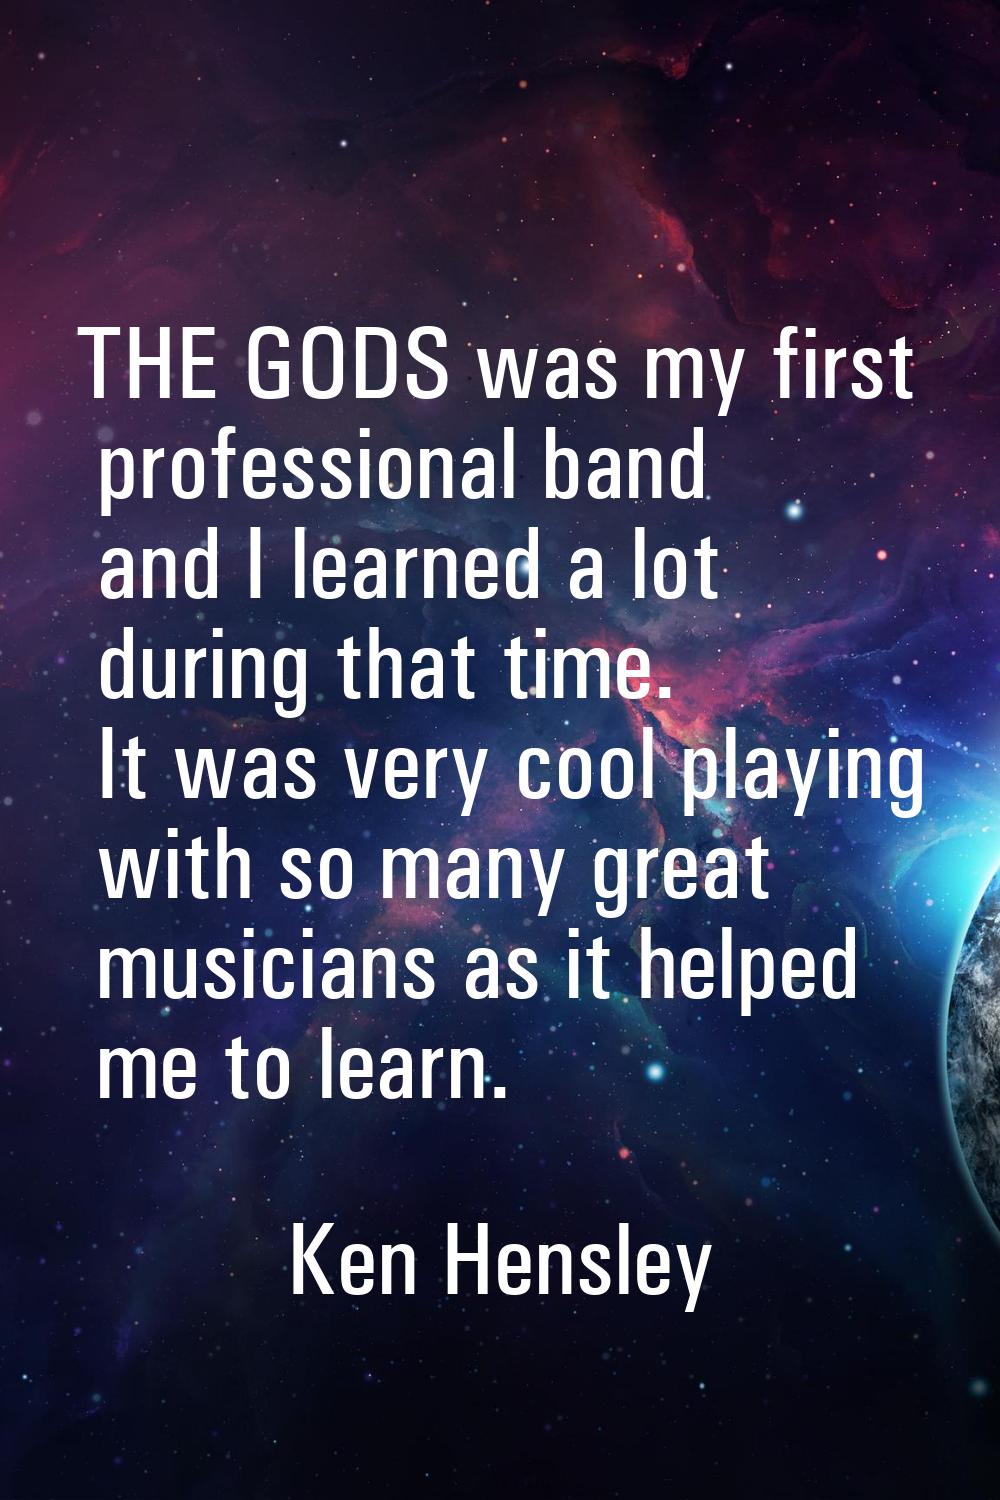 THE GODS was my first professional band and I learned a lot during that time. It was very cool play